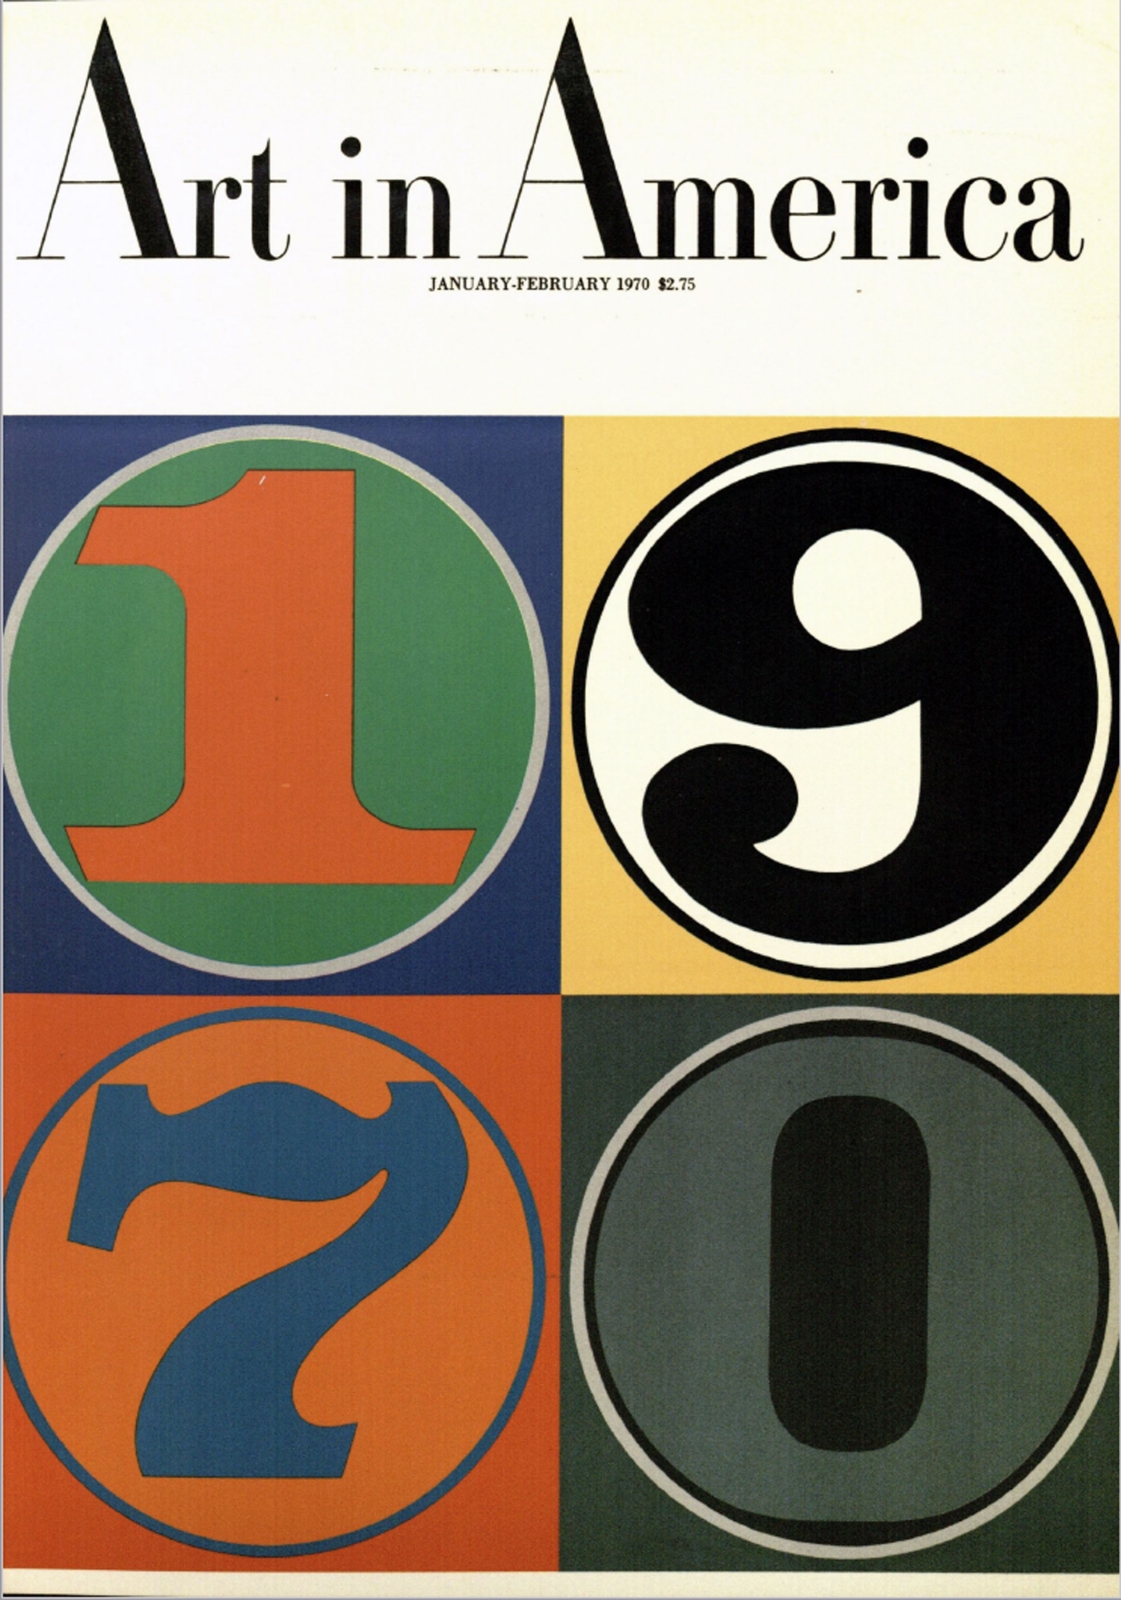 Indiana&amp;#39;s design for the cover of the periodical&amp;nbsp;Art in America, January 1970